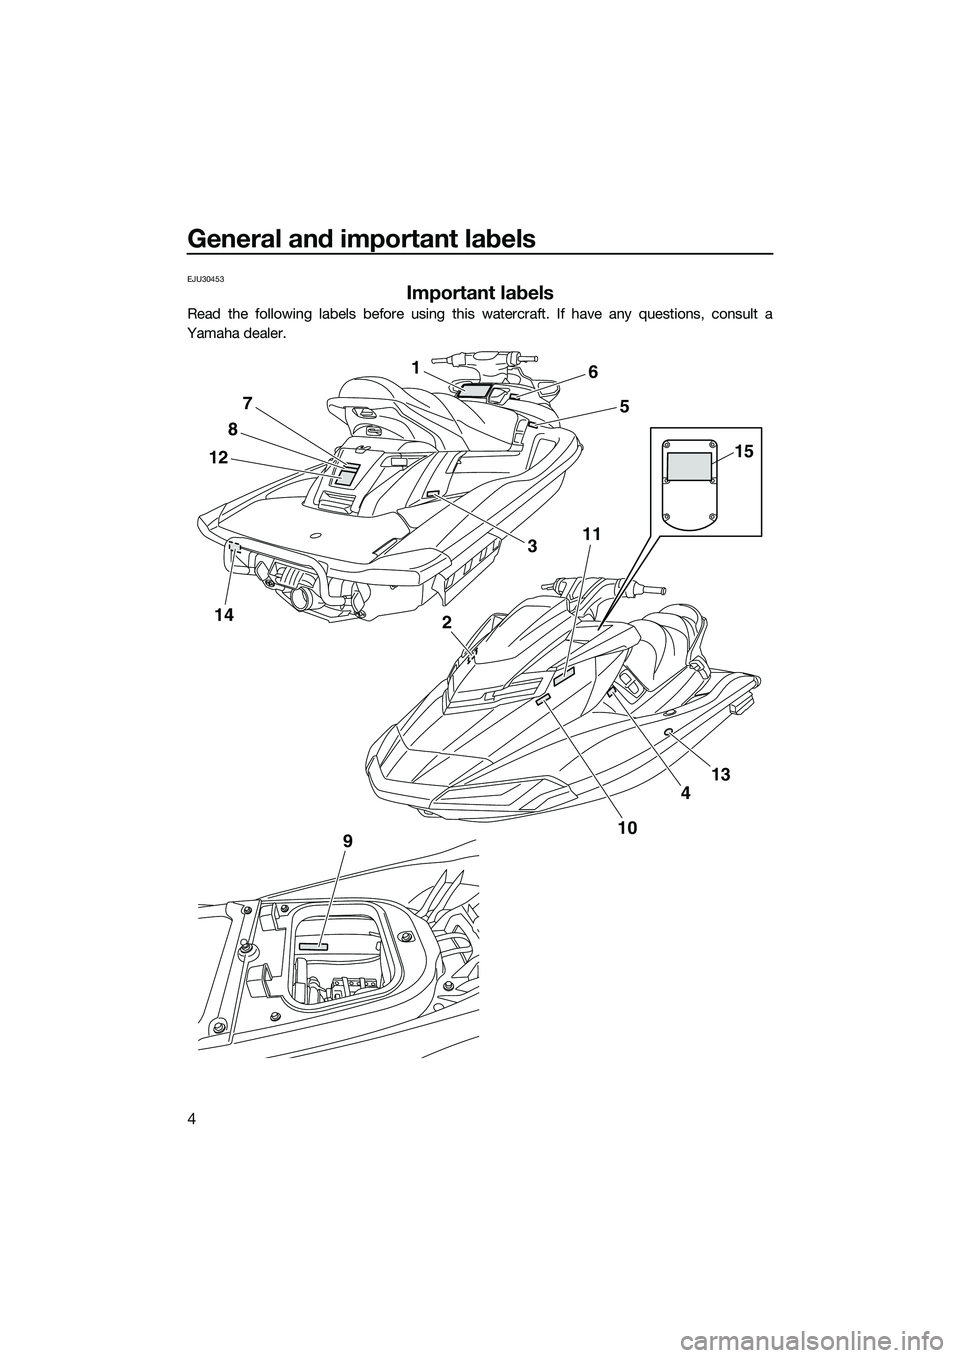 YAMAHA FX HO 2014  Owners Manual General and important labels
4
EJU30453
Important labels
Read the following labels before using this watercraft. If have any questions, consult a
Yamaha dealer.
14
1
12
8
7
11
2
9
4
13
10
6
5
3
15
UF2